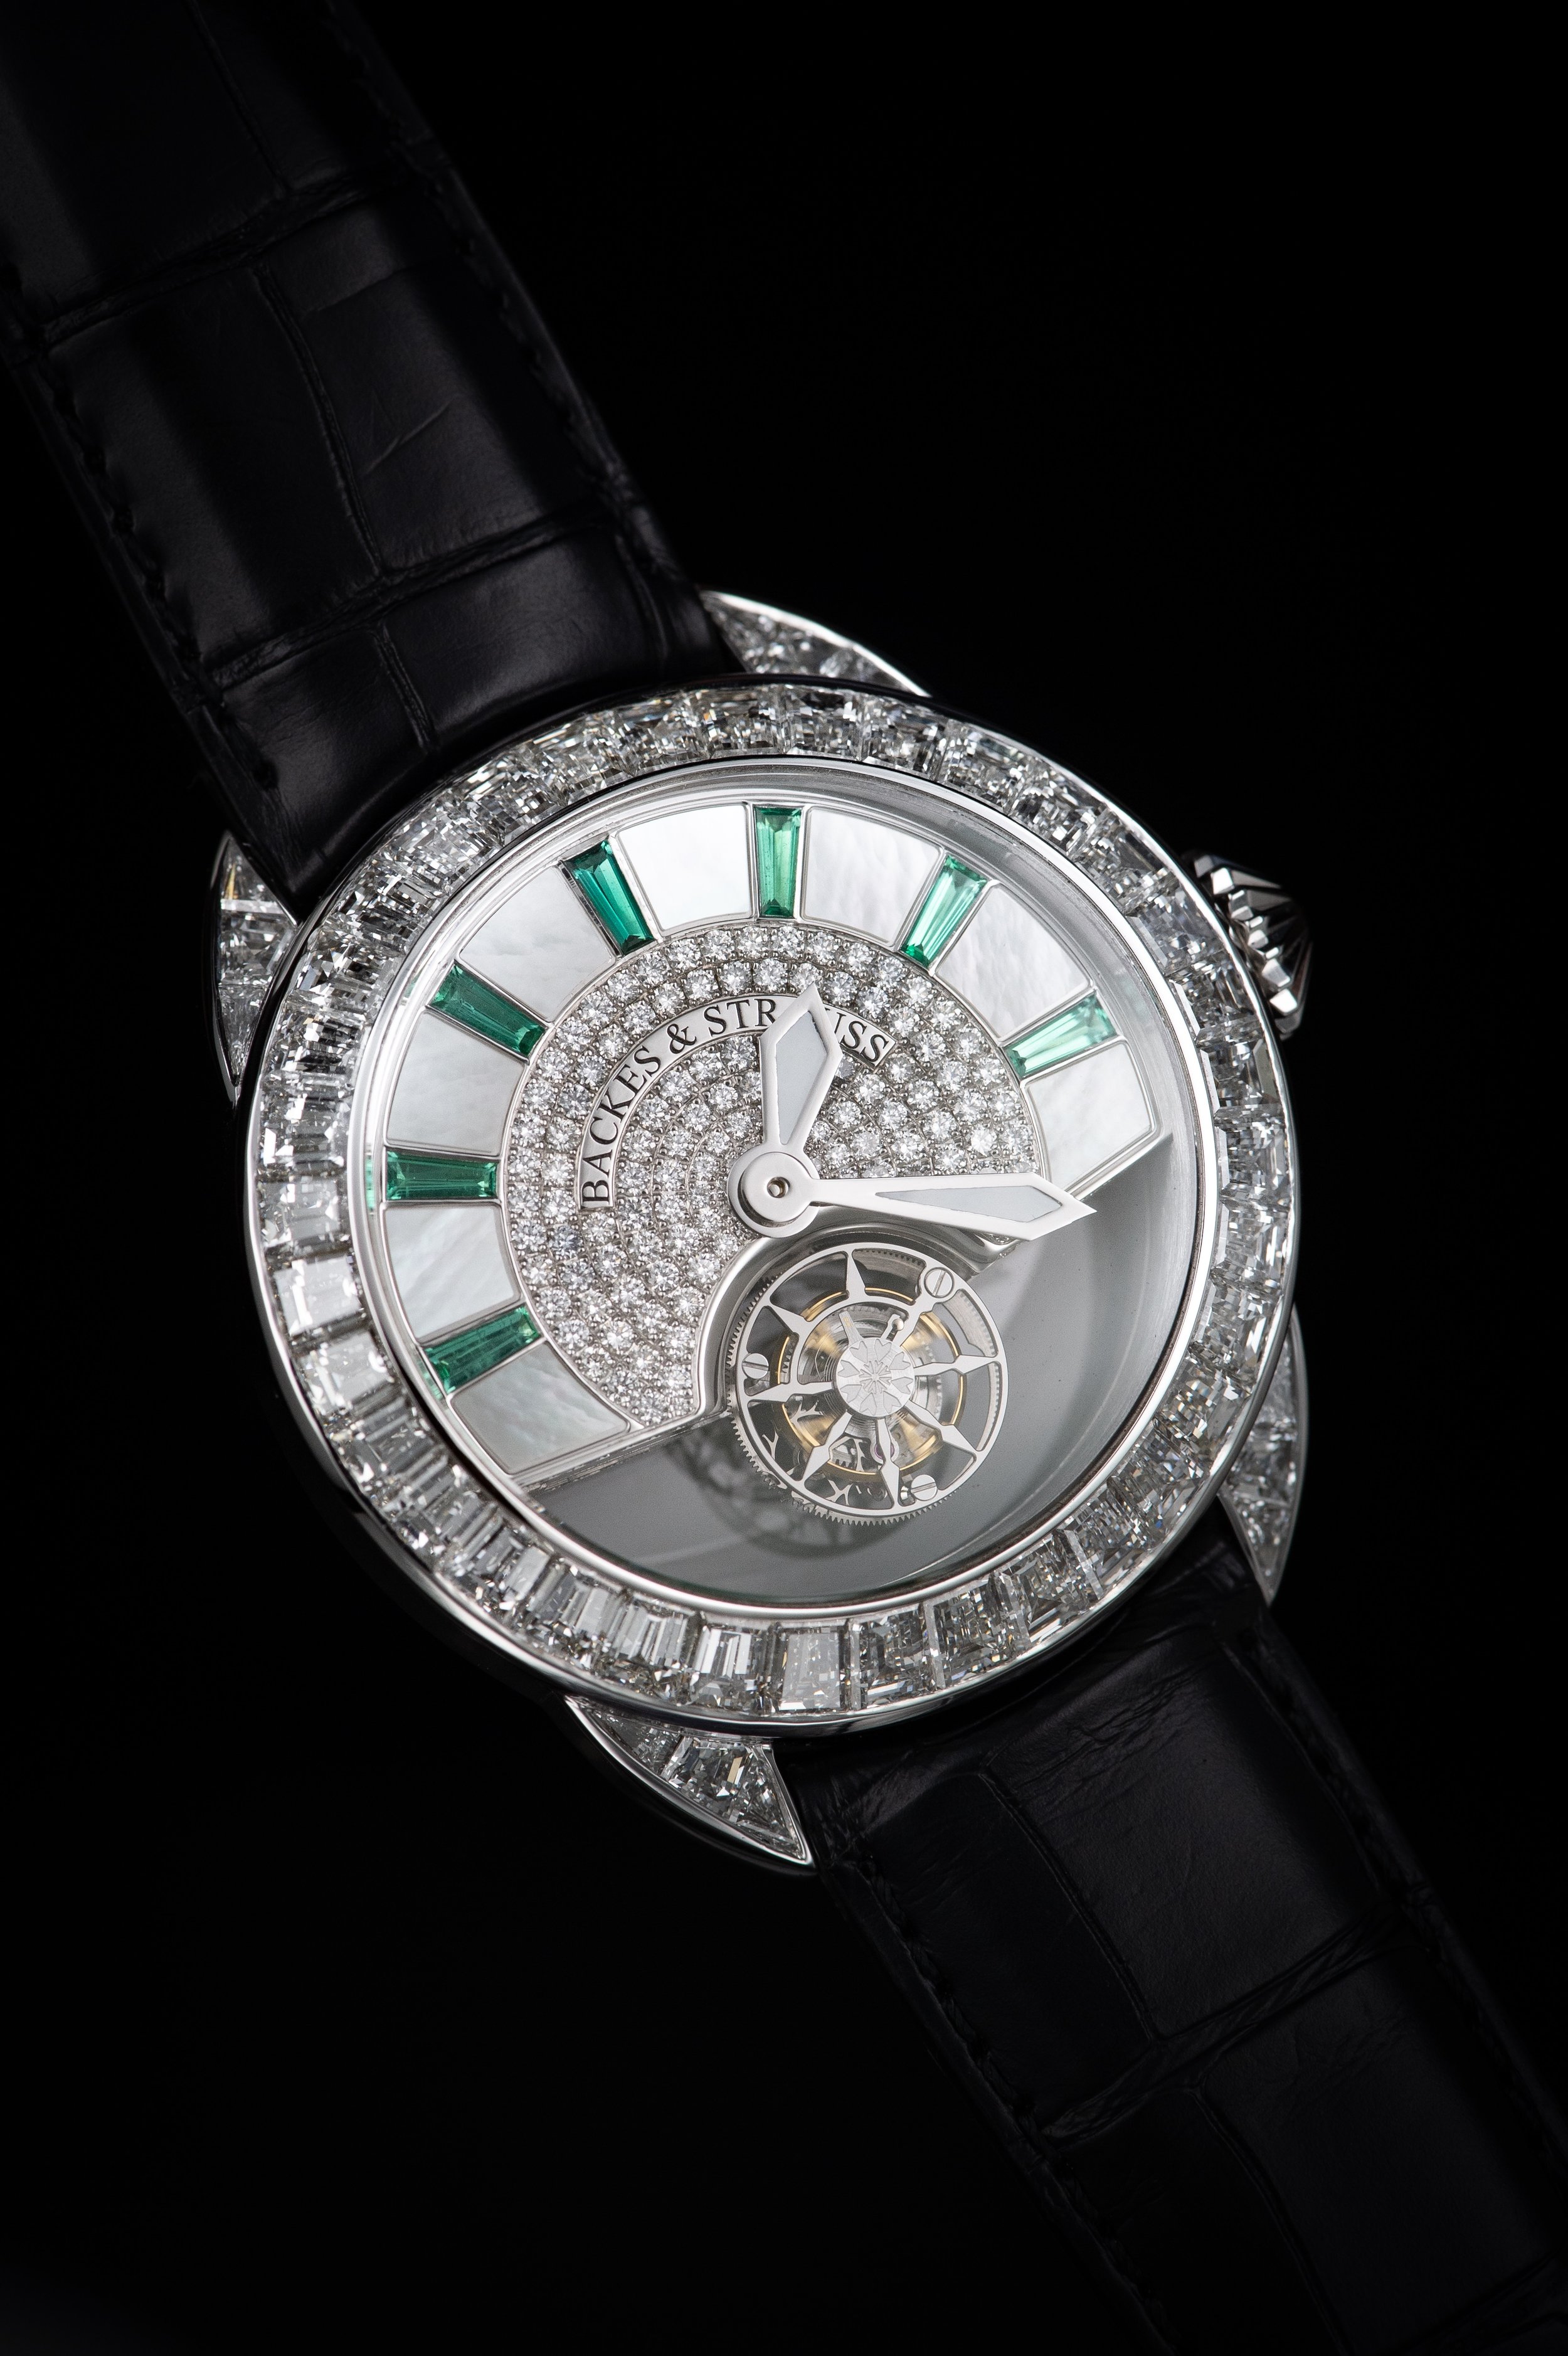 Piccadilly 45 King Tourbillon iconic diamond encrusted watch side-shot